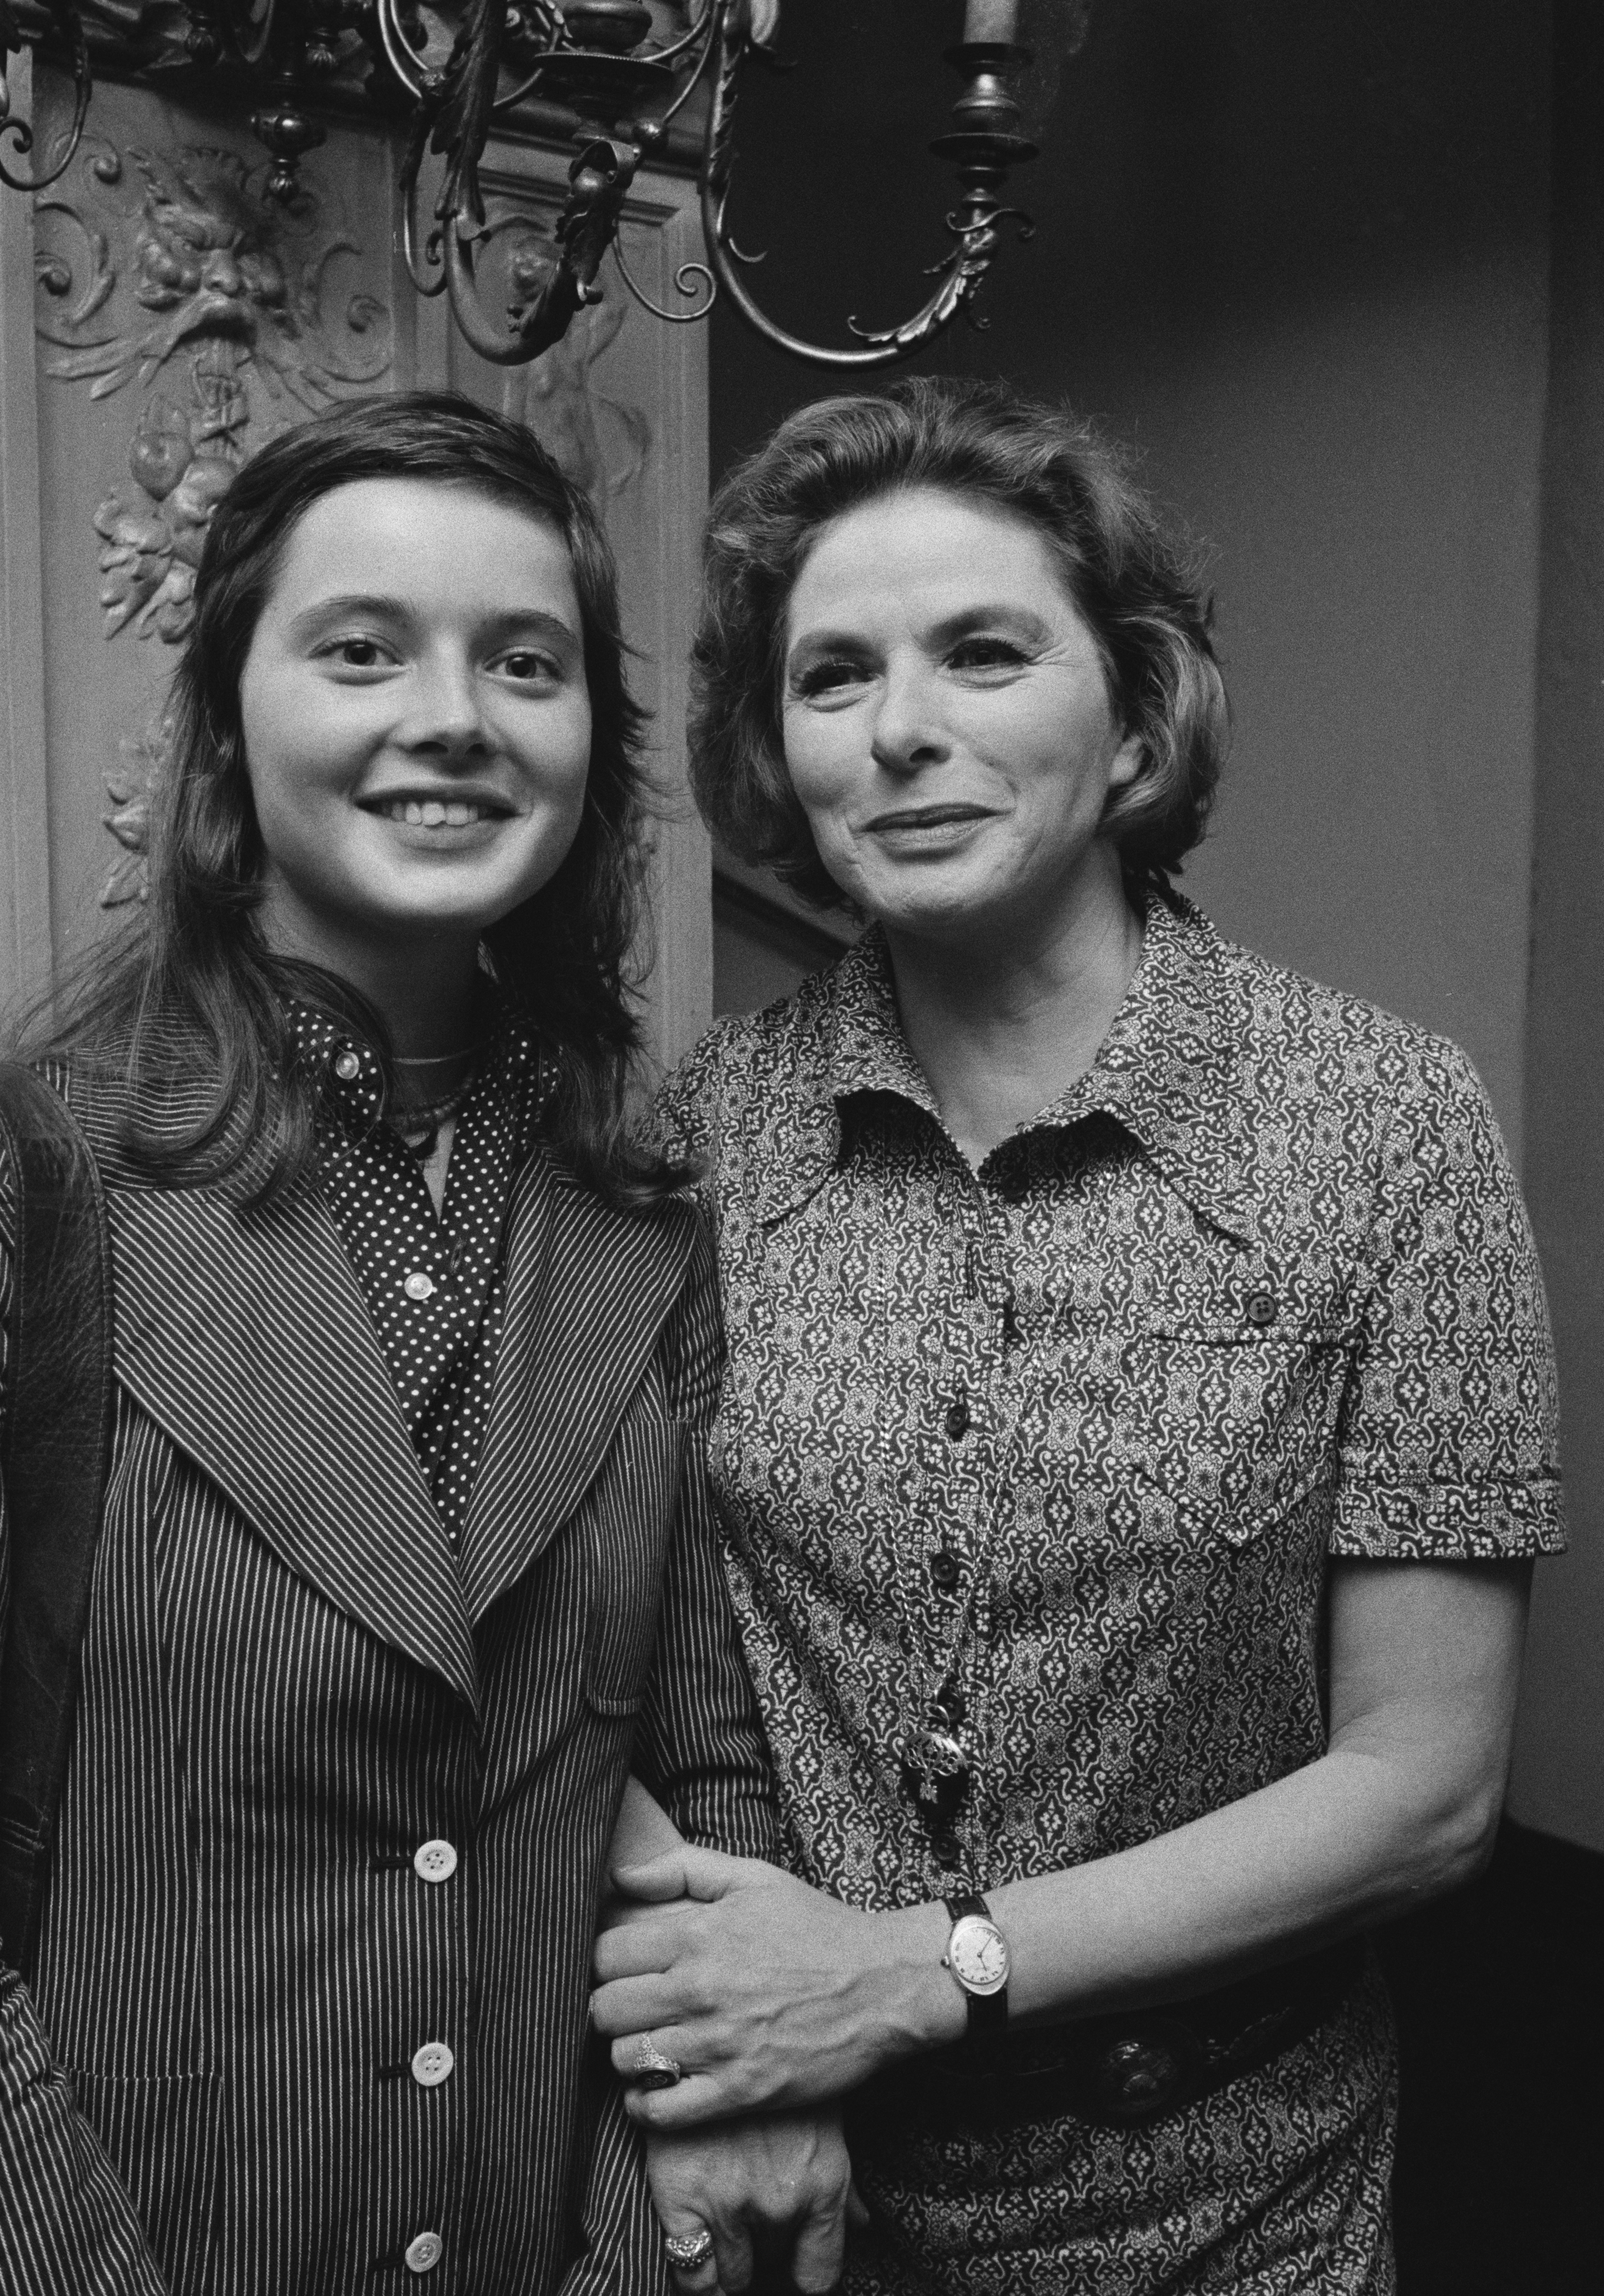 Ingrid Bergman with Isabella Rossellini in the United Kingdom, 1971 | Source: Getty Images